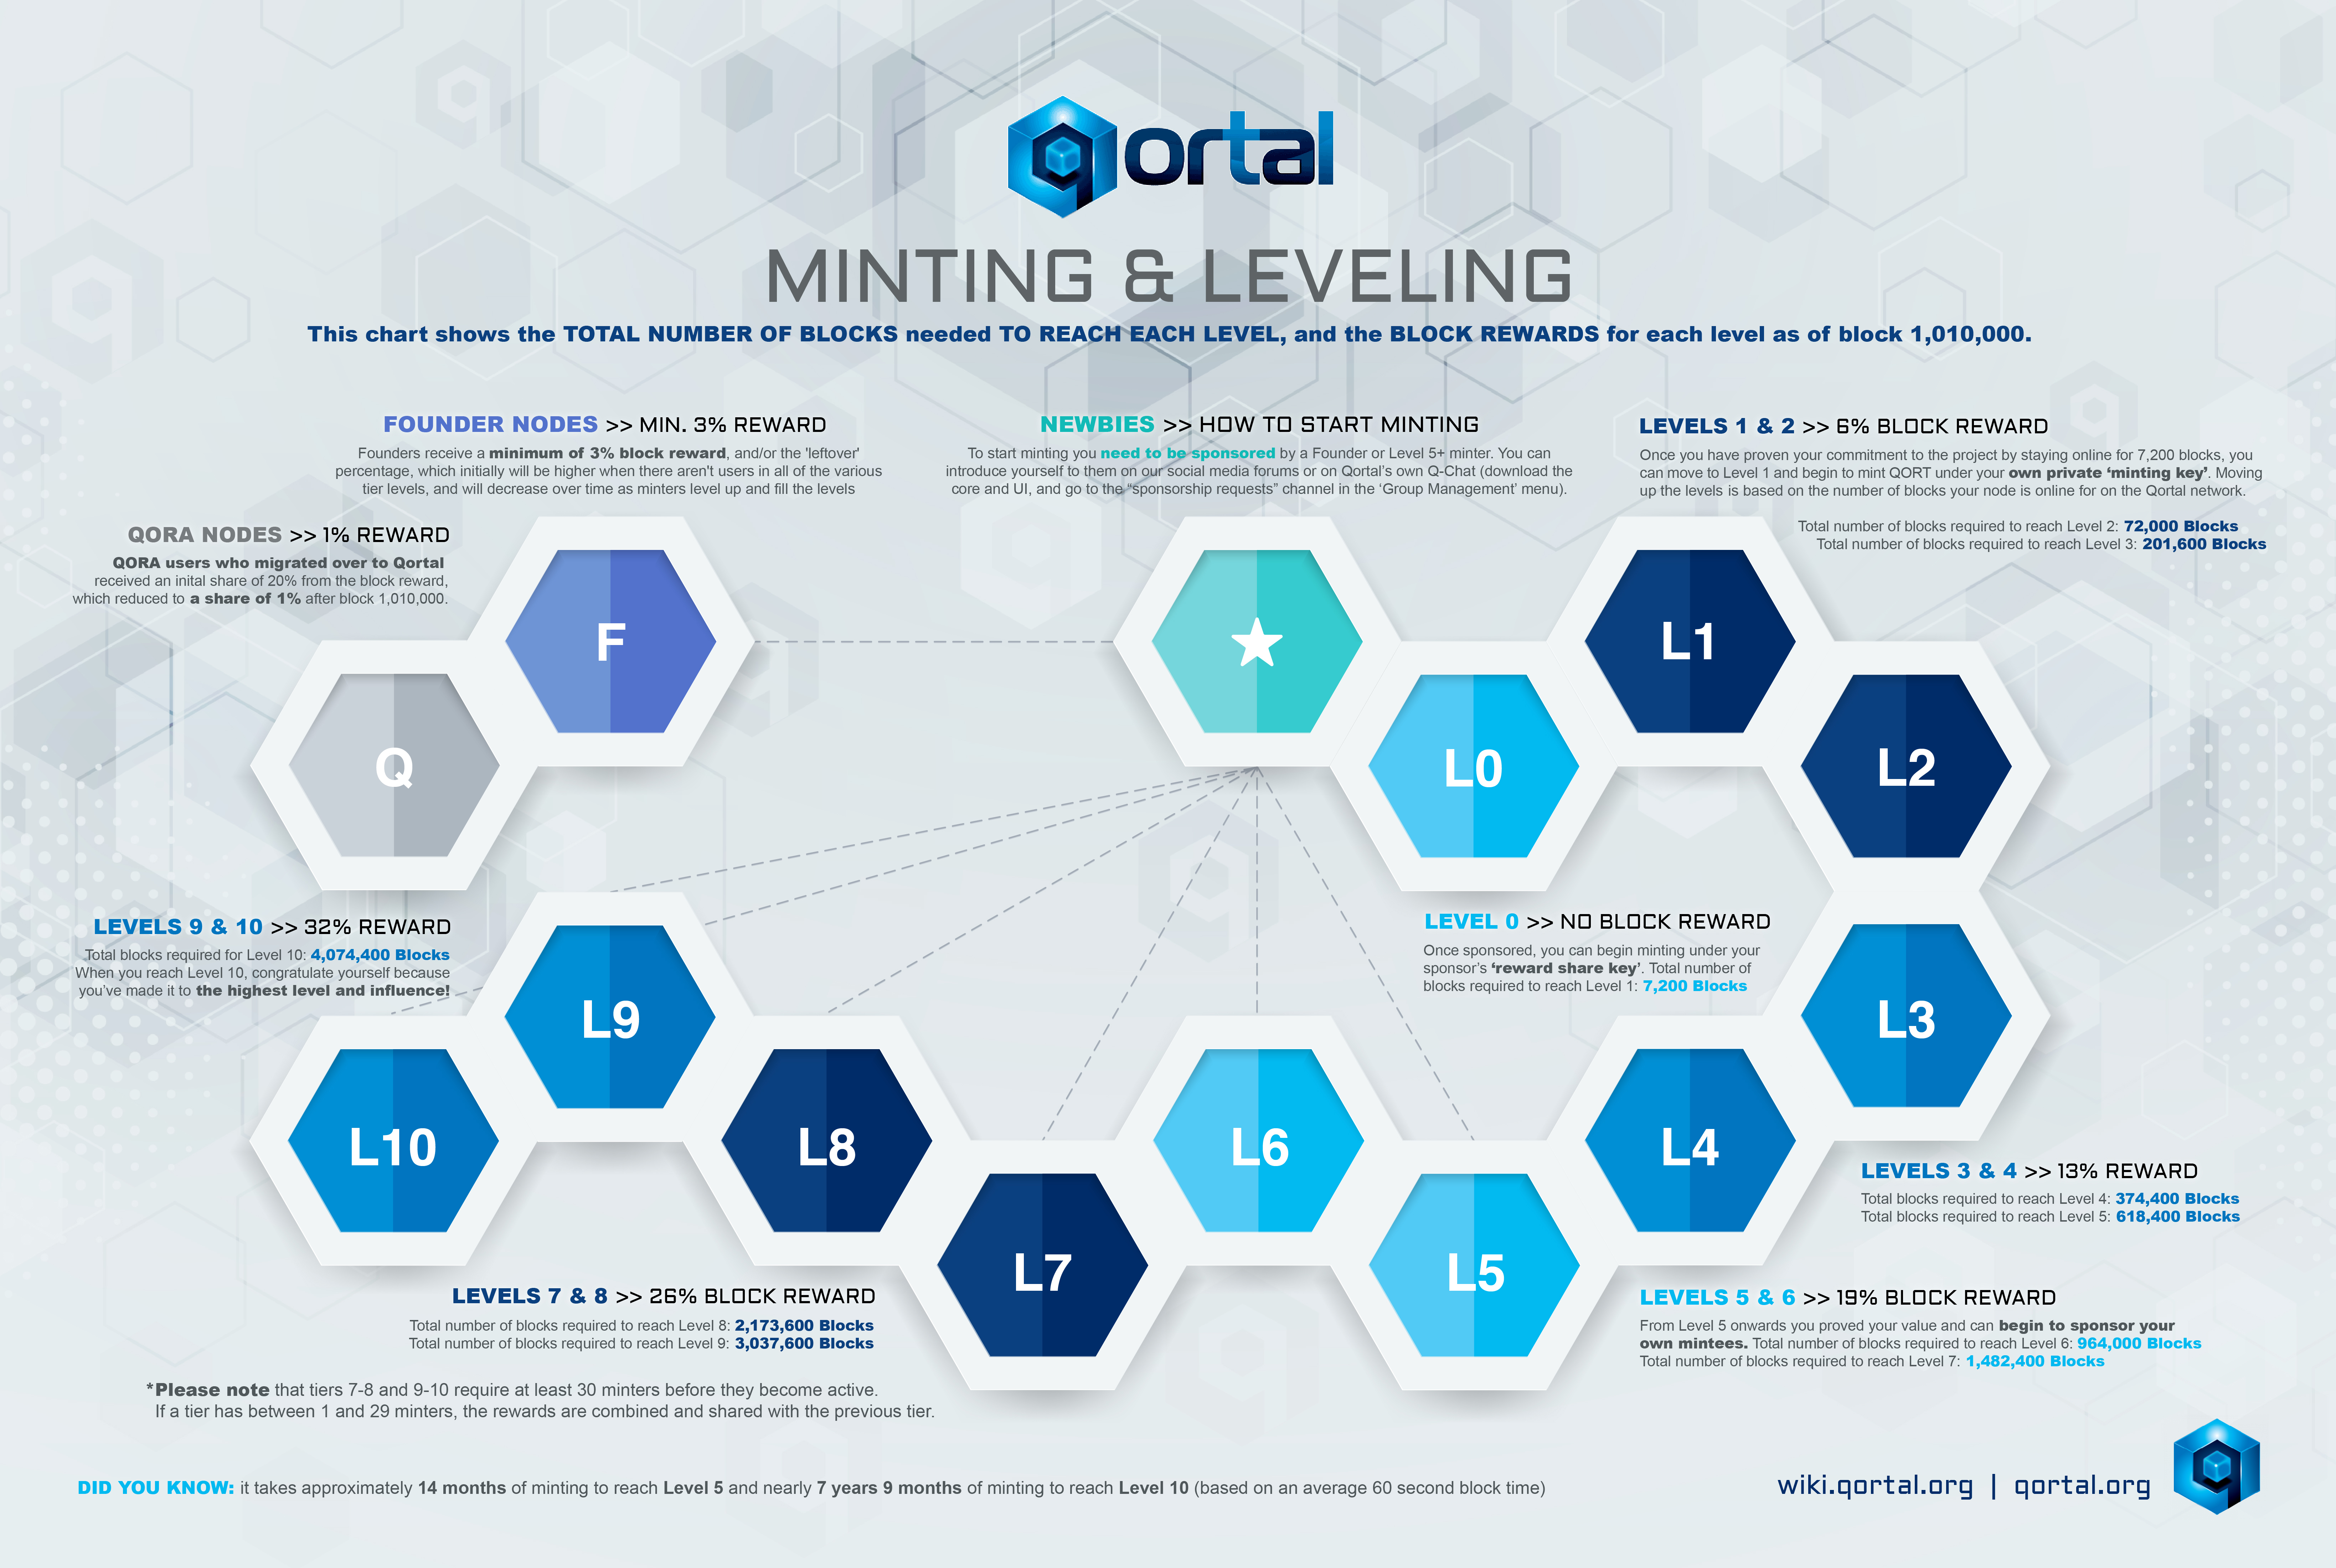 qortal_minting_and_leveling_2023.1678575166.jpg